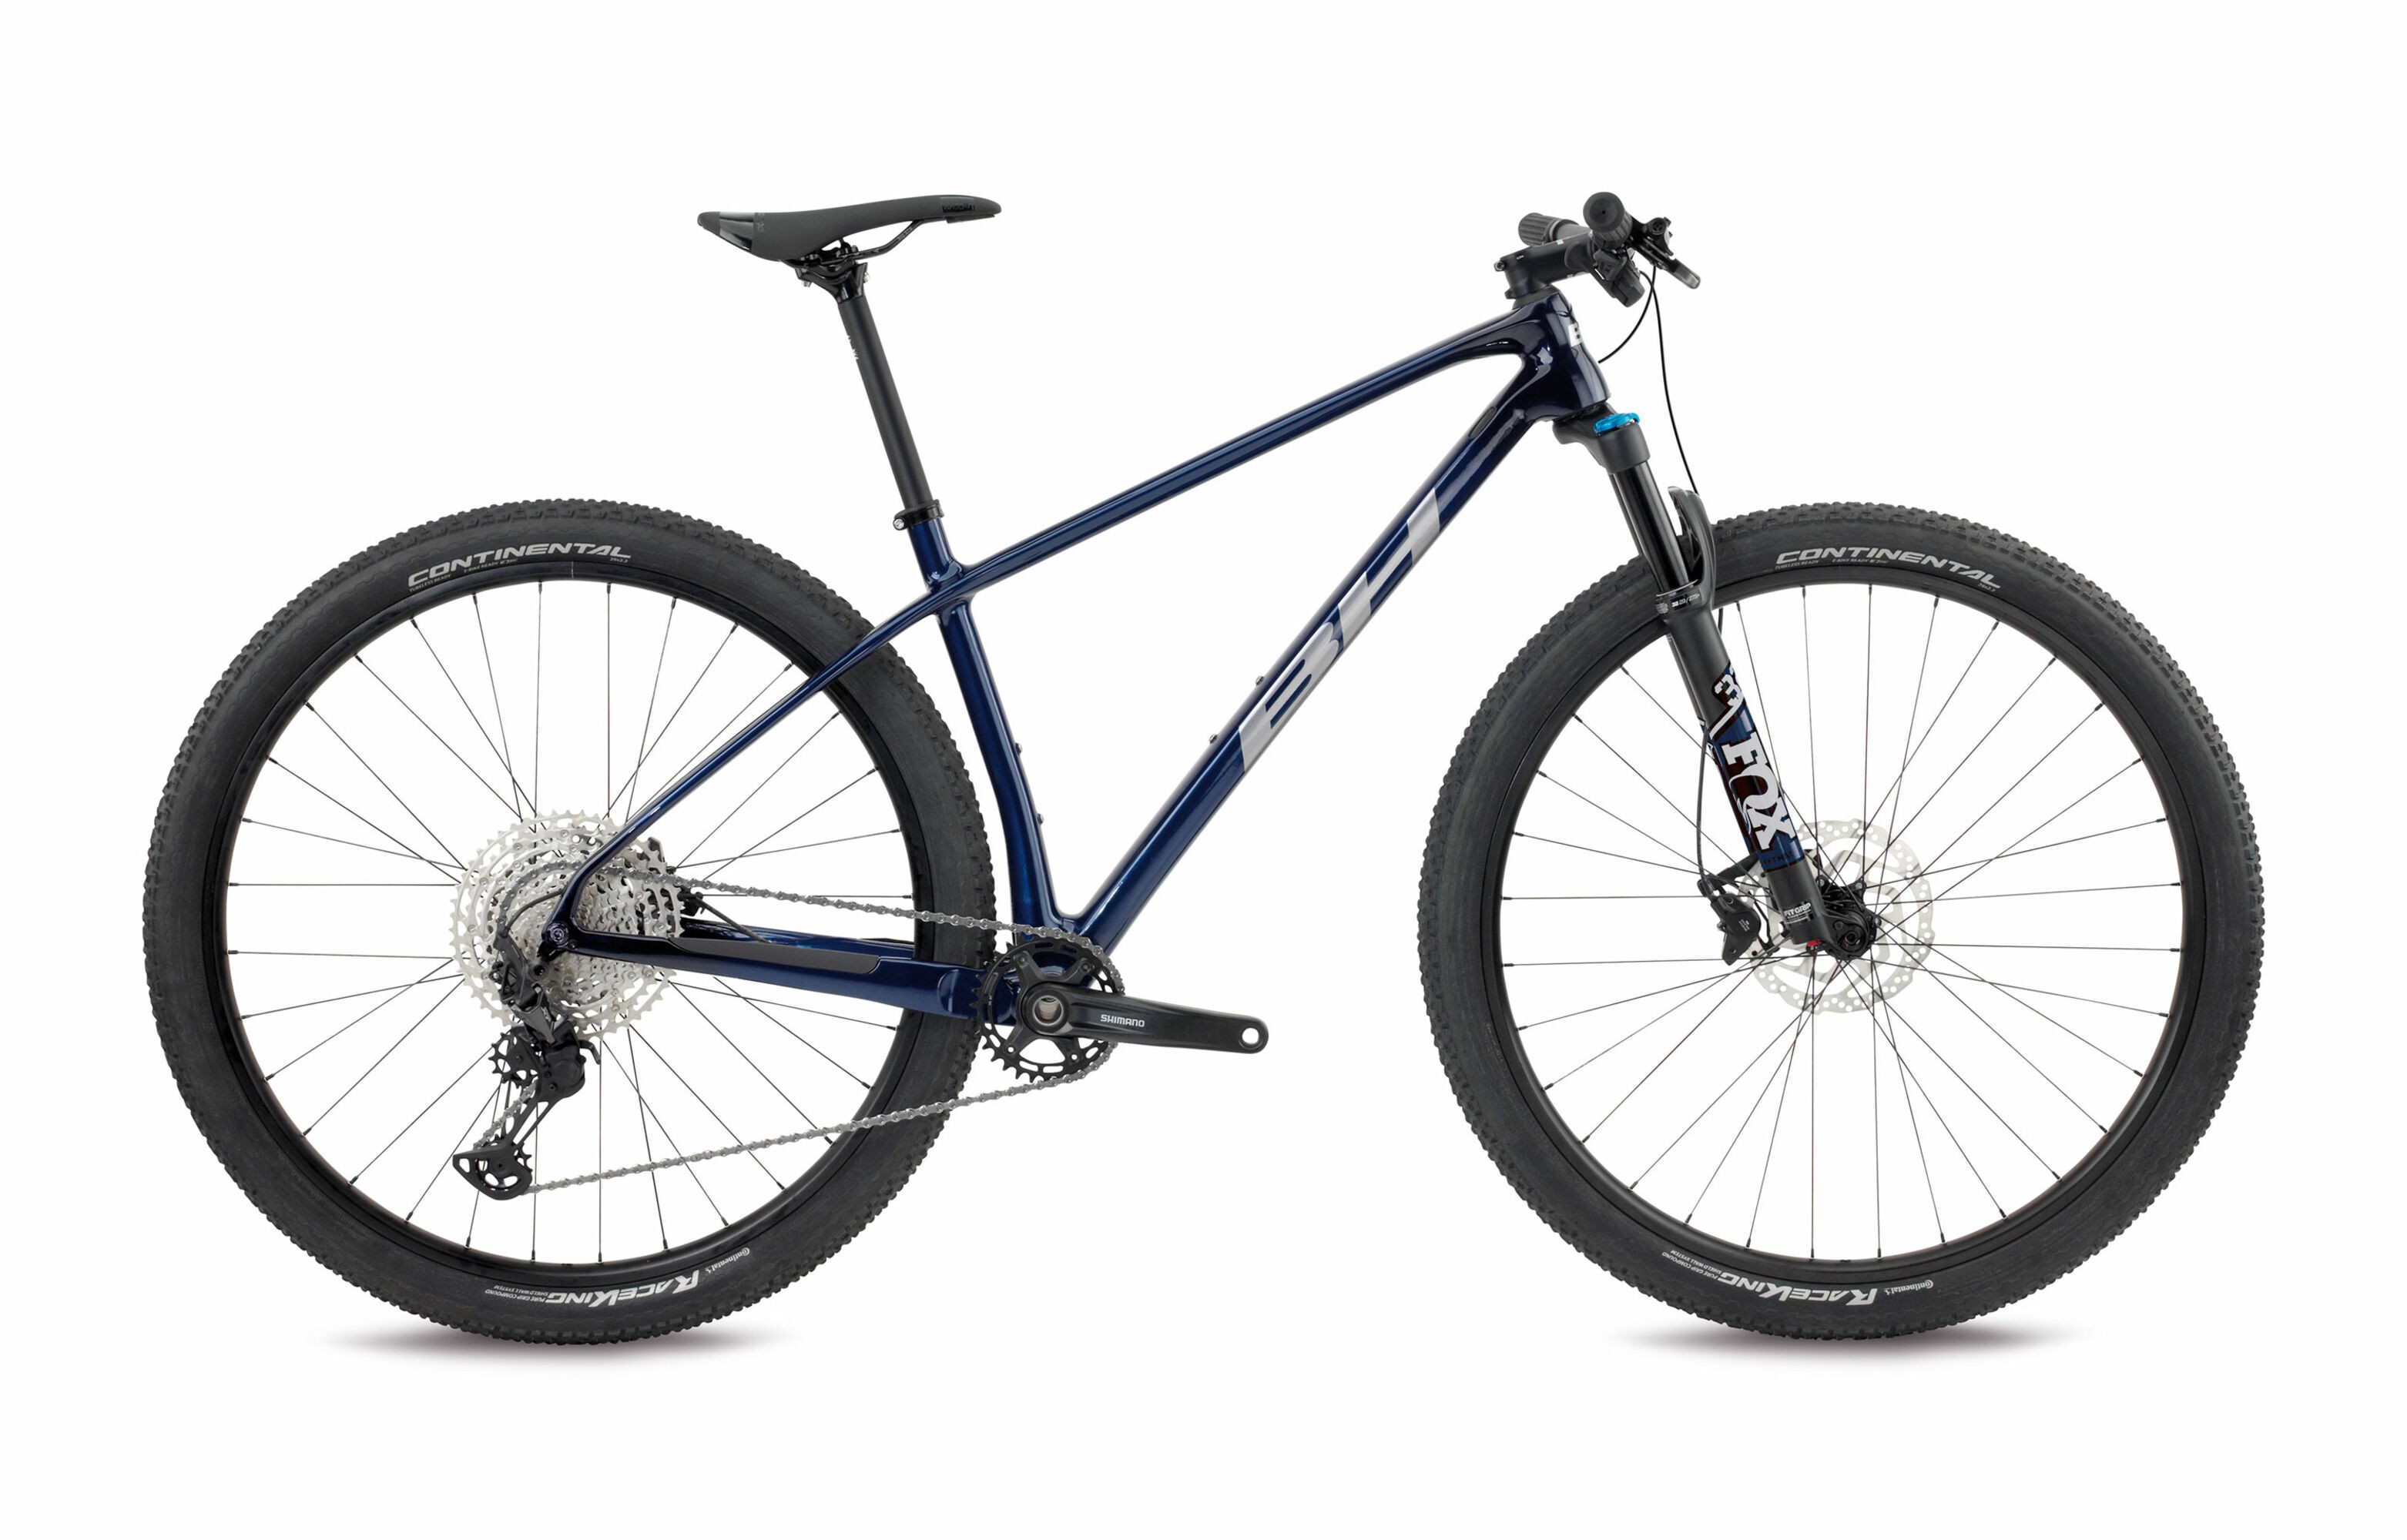 2021 Ultimate RC XT NEW Bike (only For Sale In The Canary